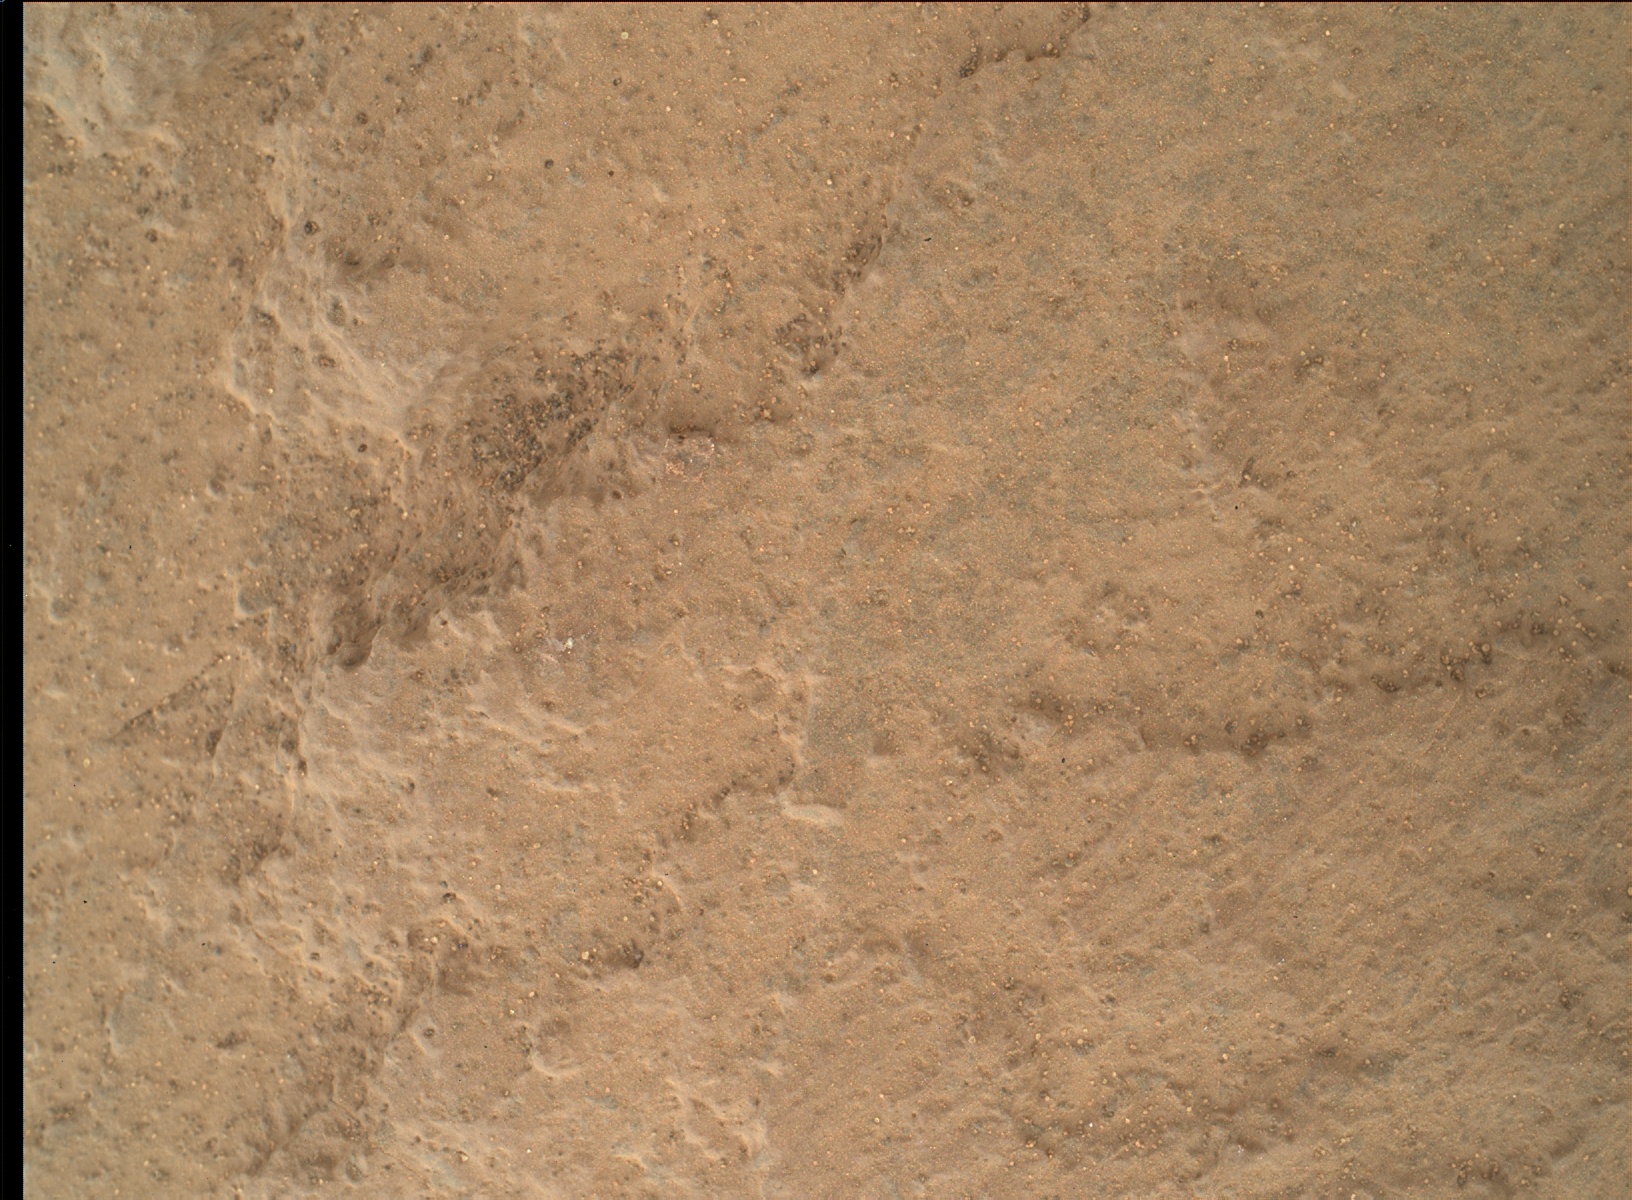 Nasa's Mars rover Curiosity acquired this image using its Mars Hand Lens Imager (MAHLI) on Sol 1198